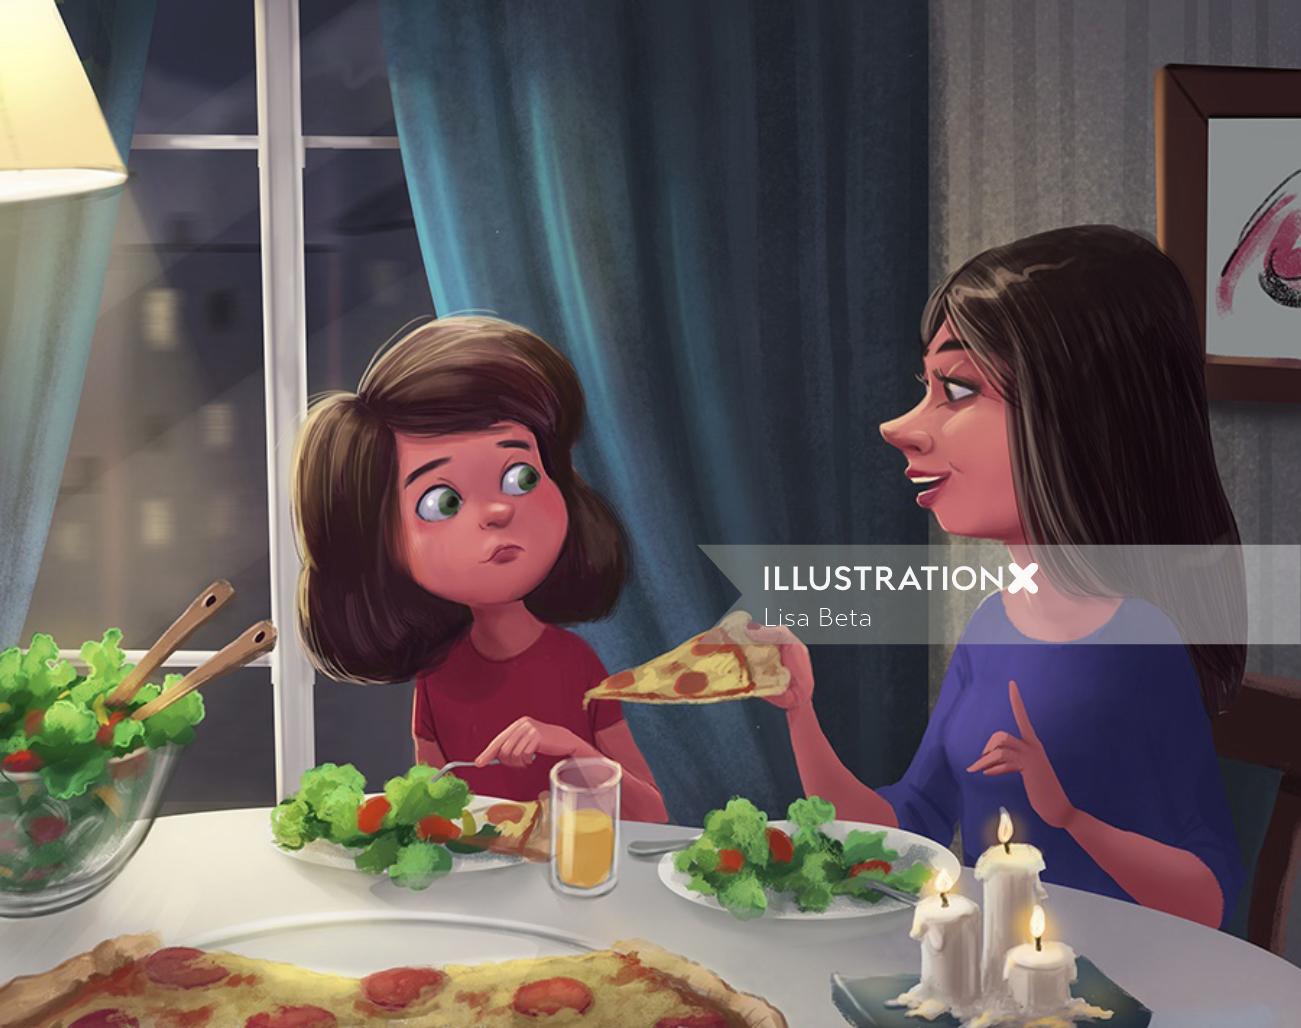 Cartoon mother & daughter eating pizza